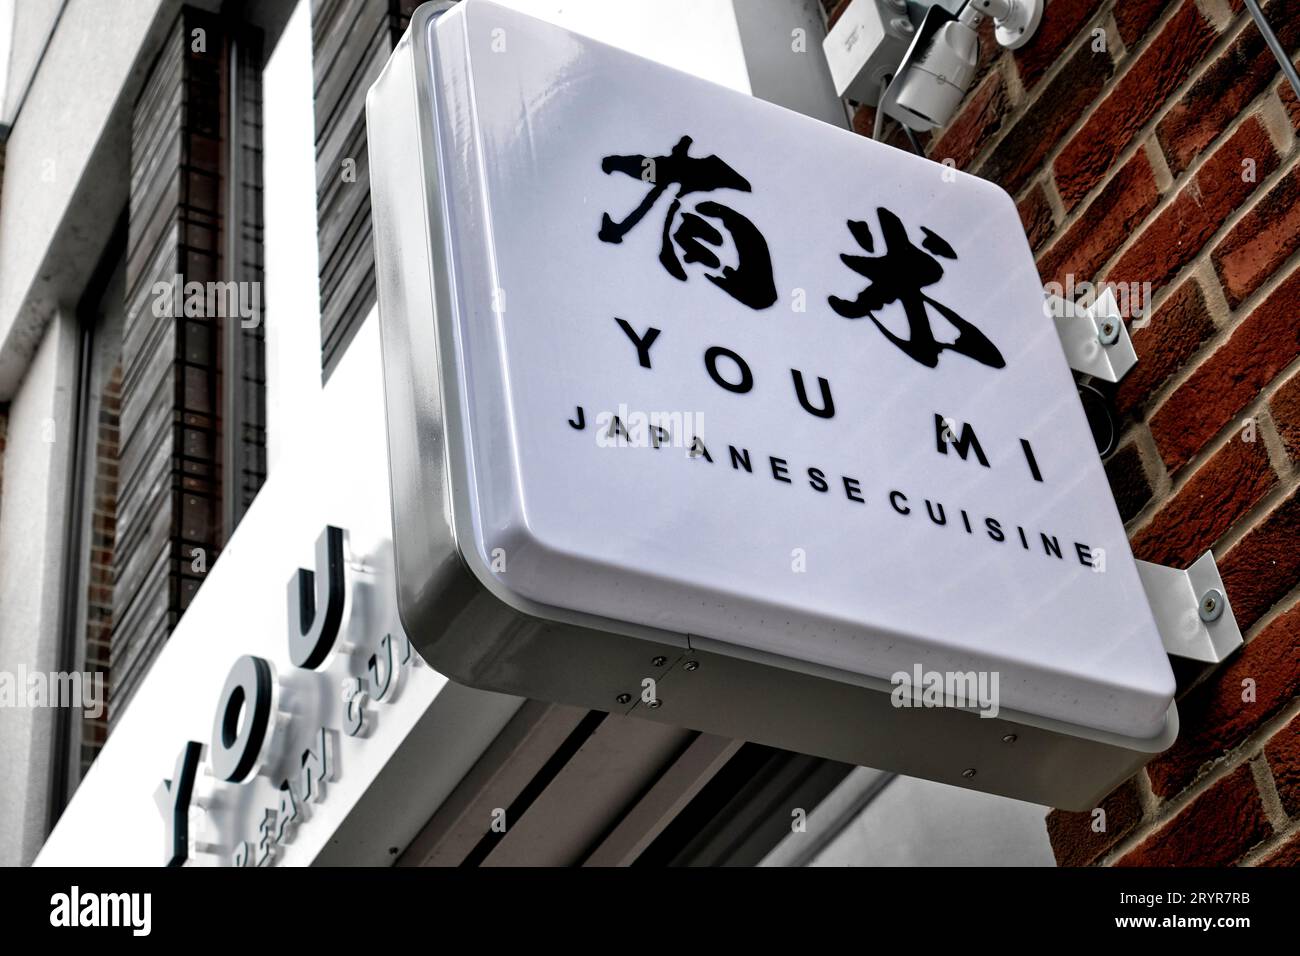 Japanese restaurant  sign You Mi with intentional malapropism. Stock Photo